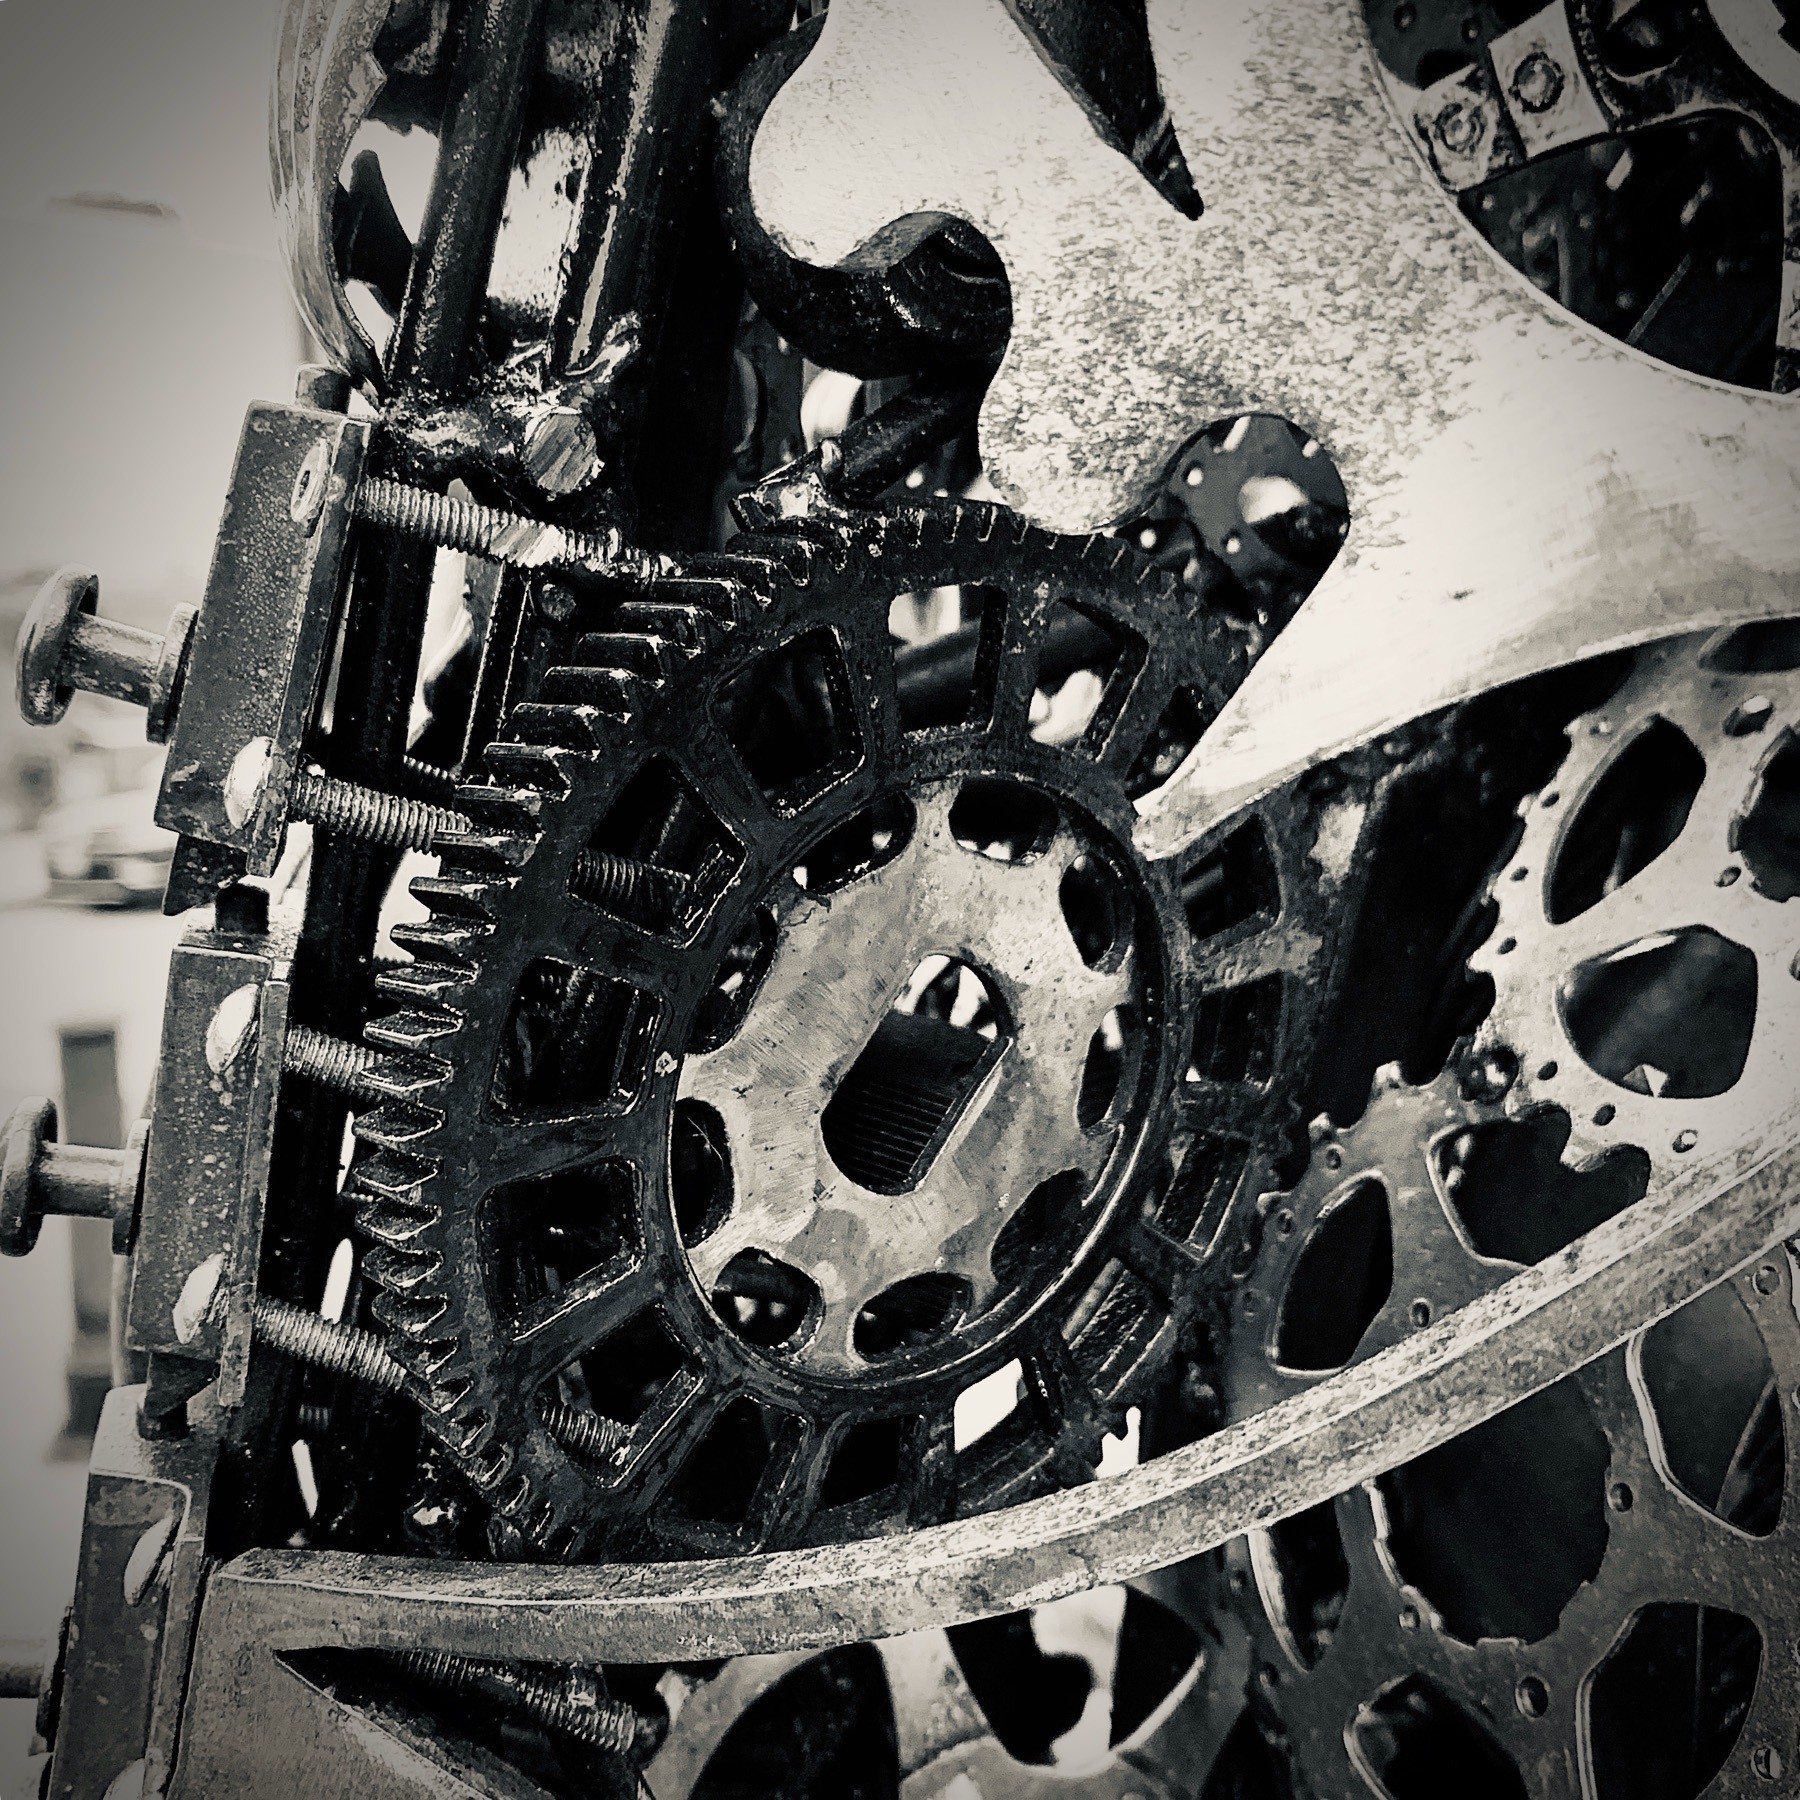 Close up of bicycle gears and sprockets from a sculpture.